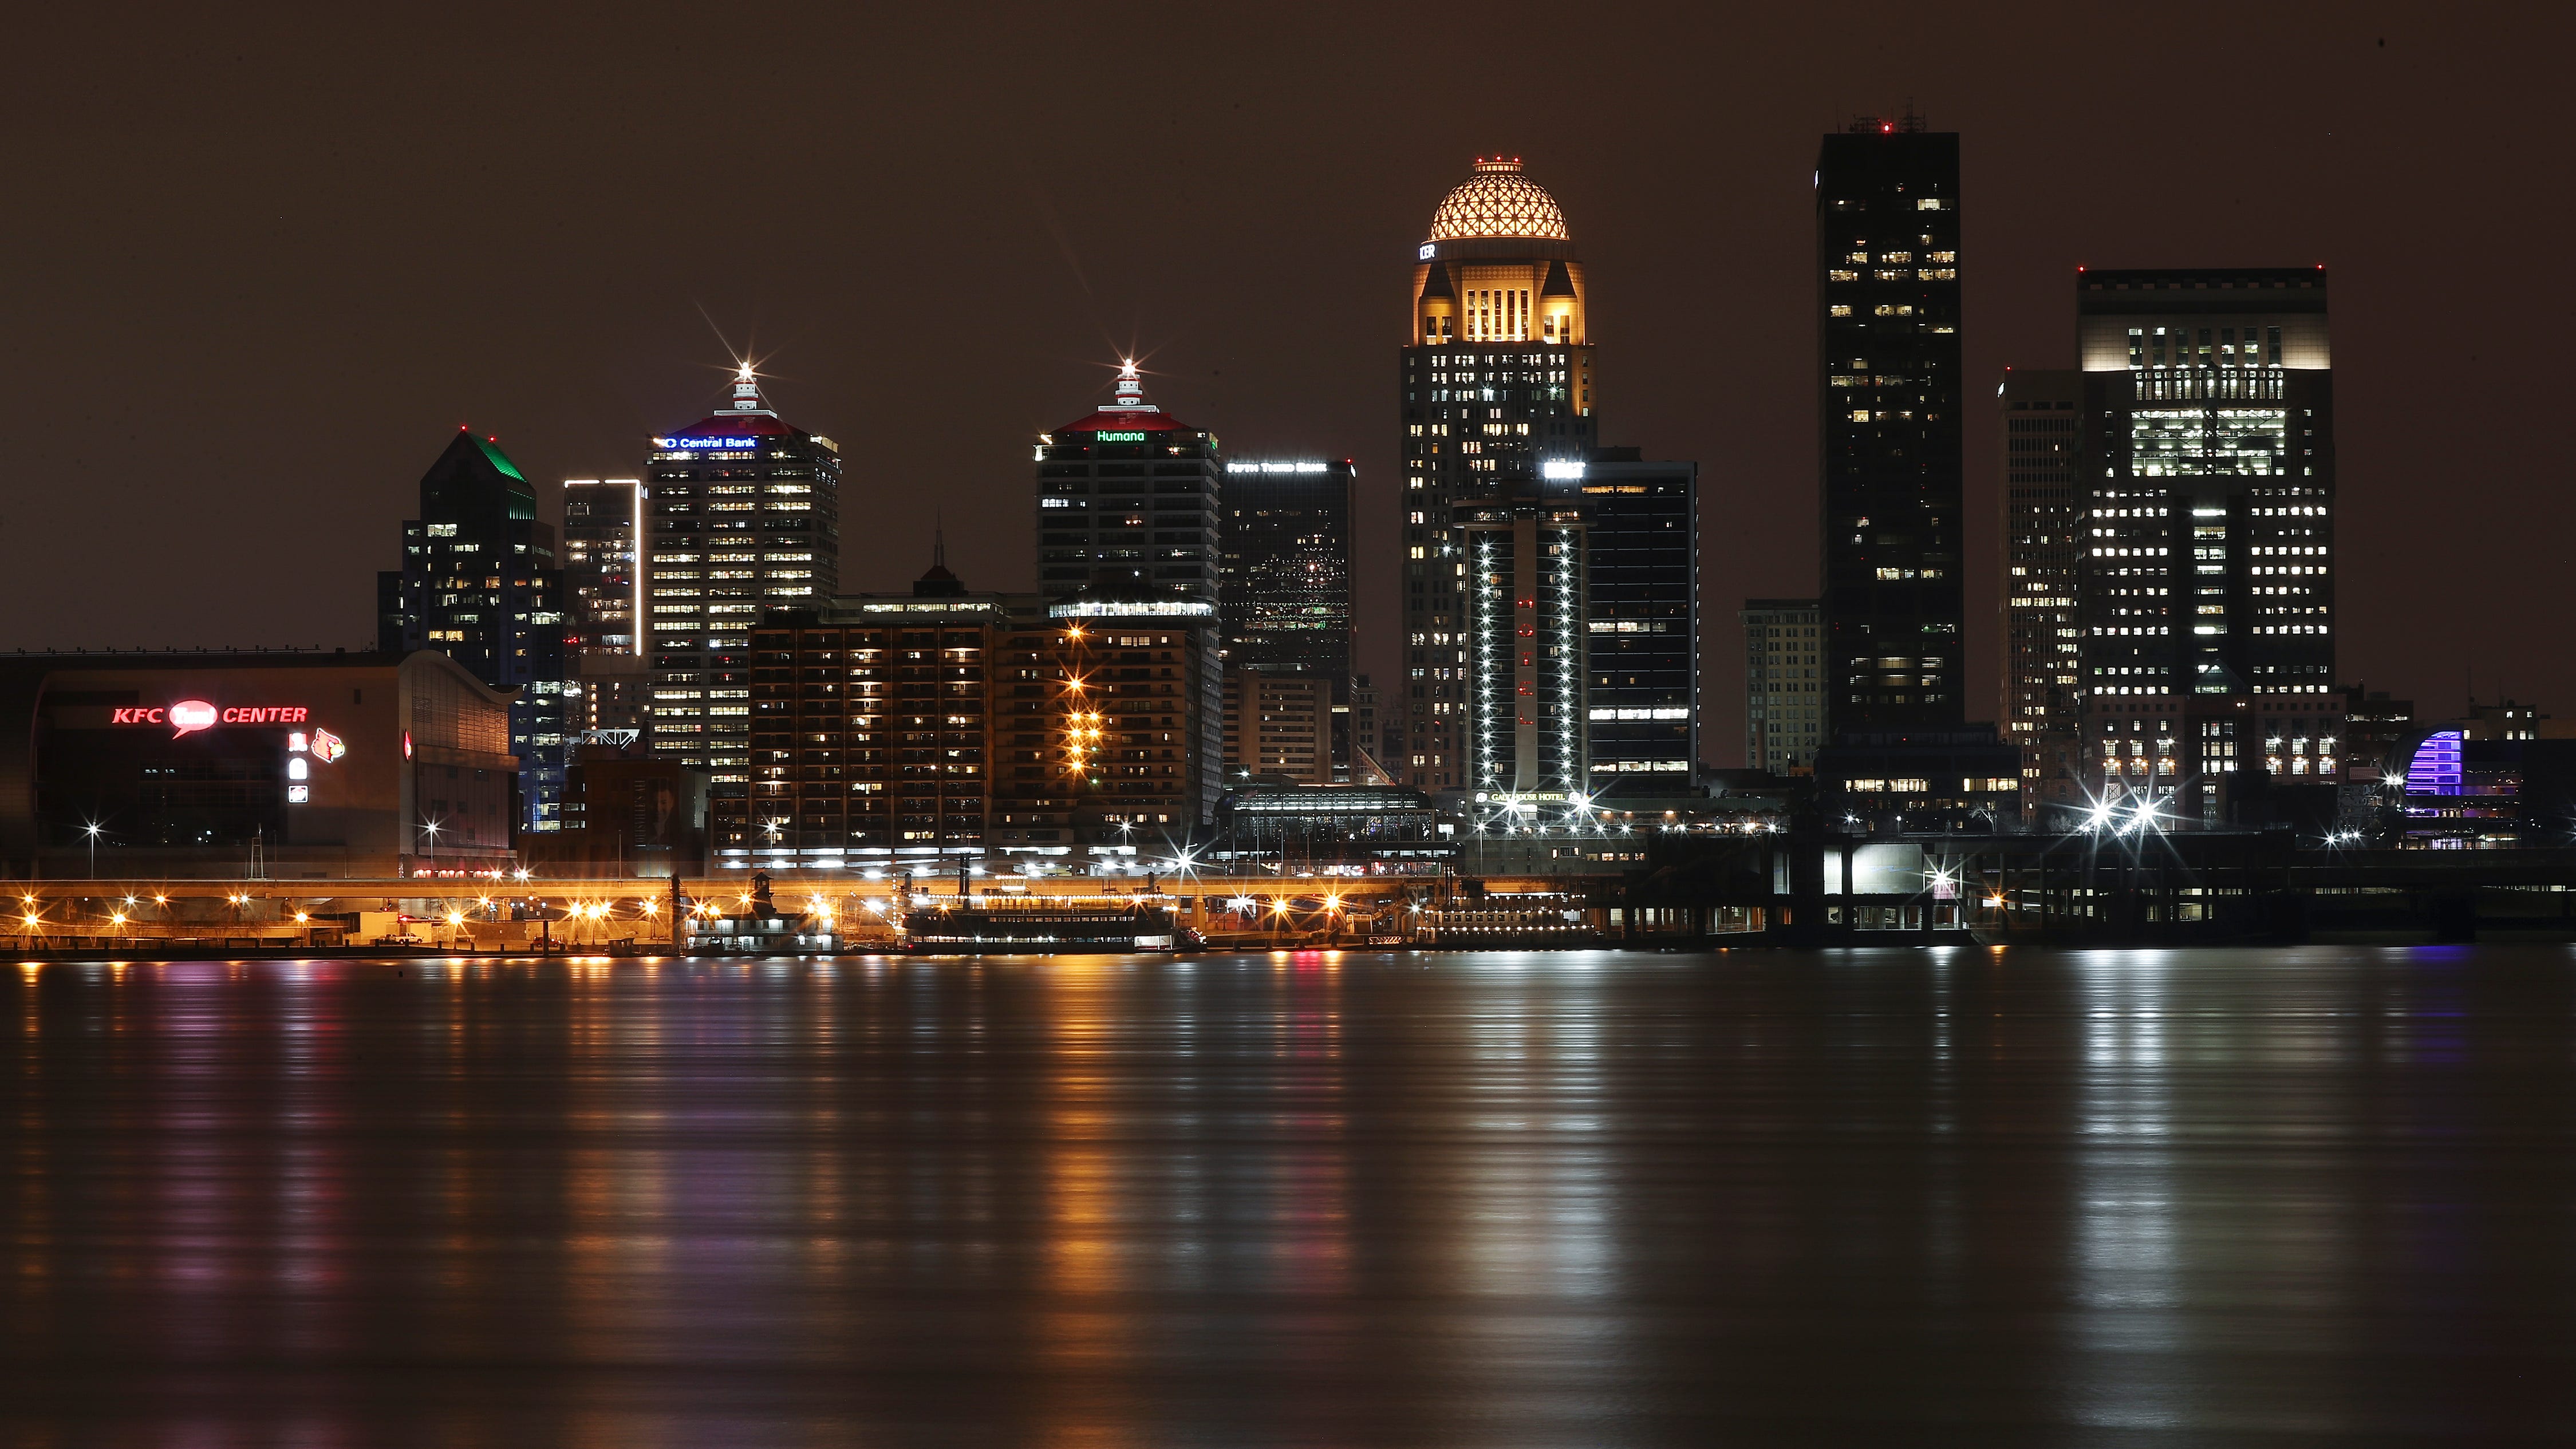 Louisville at night: City doesn't go to sleep when sun goes down